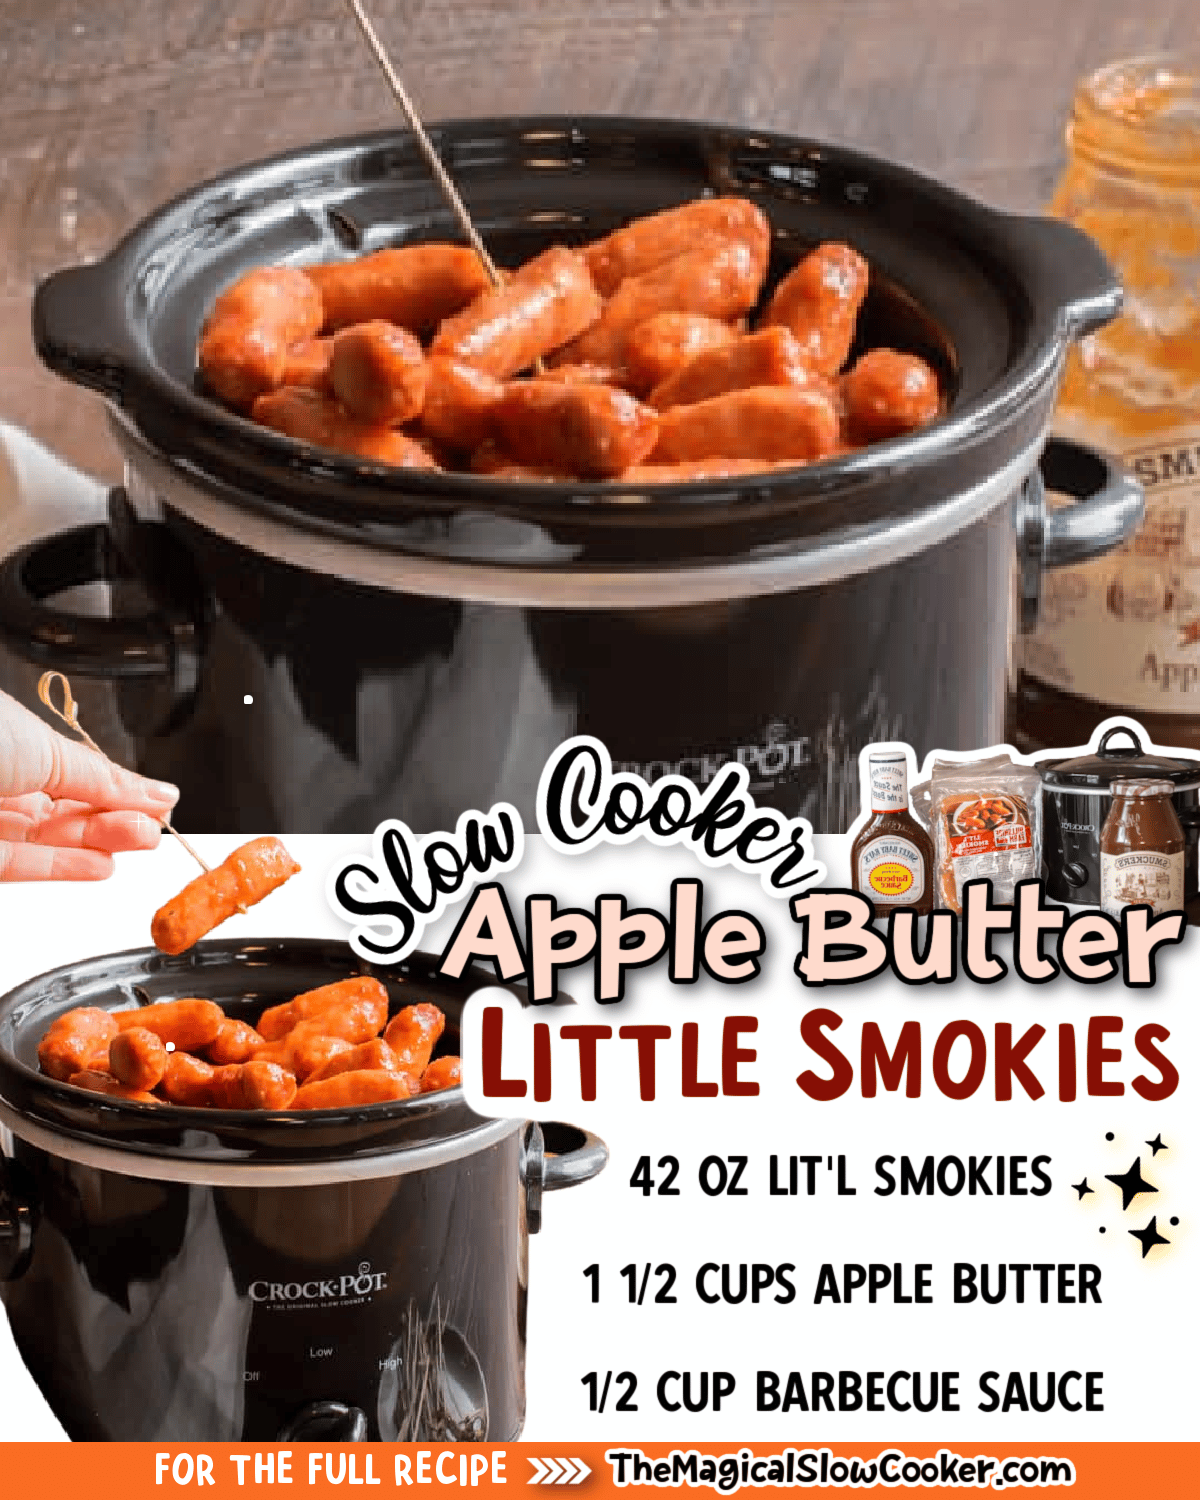 Collage of apple butter little smokie images with text of what the ingredients are for facebook or pinterest.